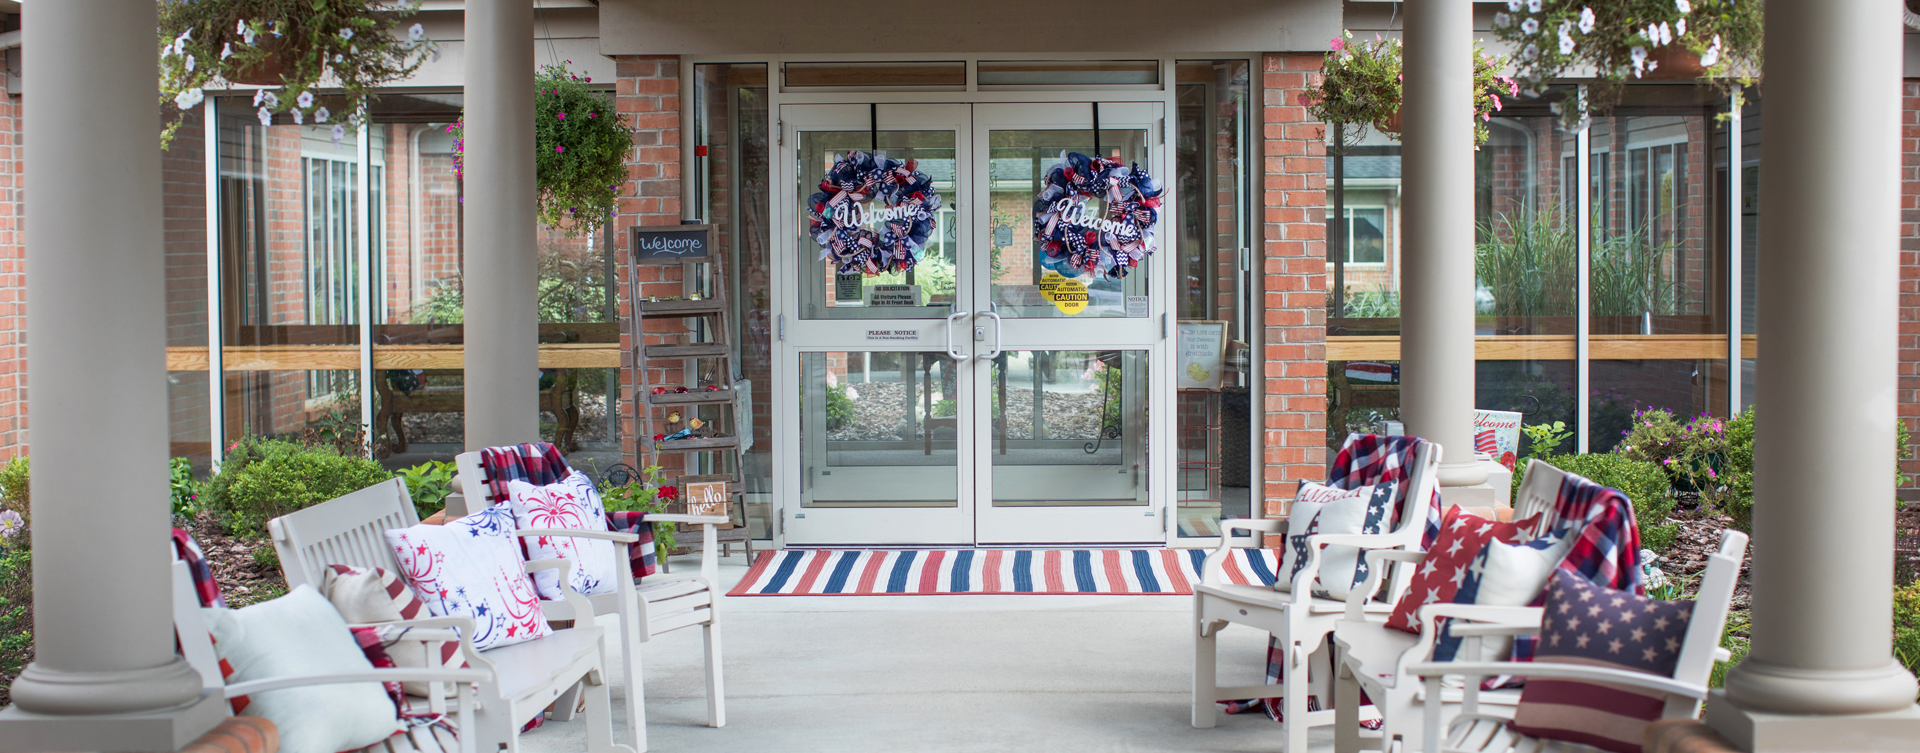 Enjoy conversations with friends on the porch at Bickford of Lancaster